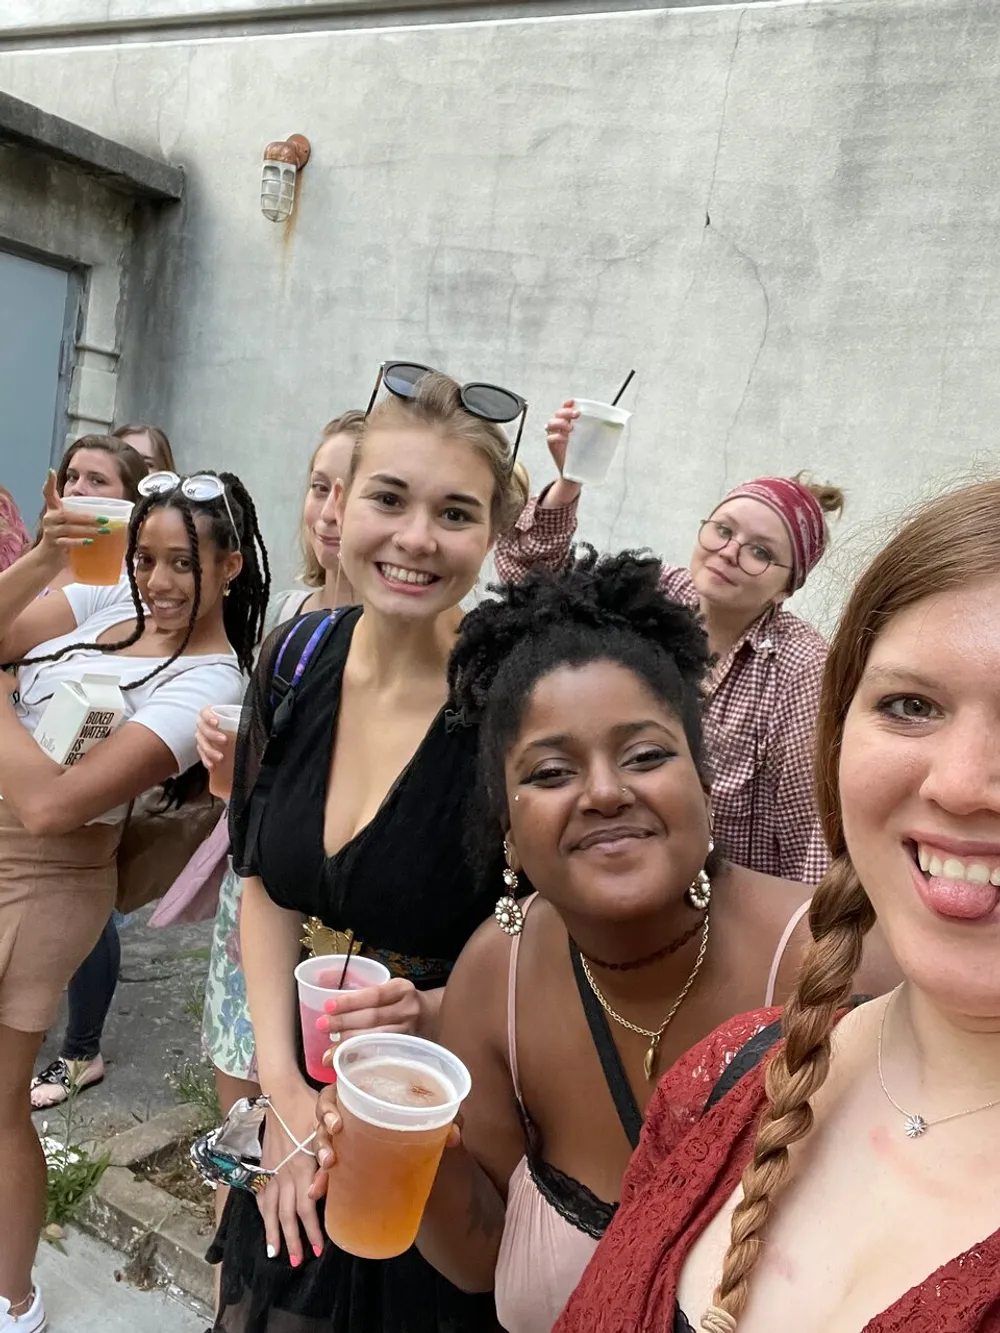 A group of people are taking a cheerful selfie together while holding drinks suggesting a social gathering or celebration